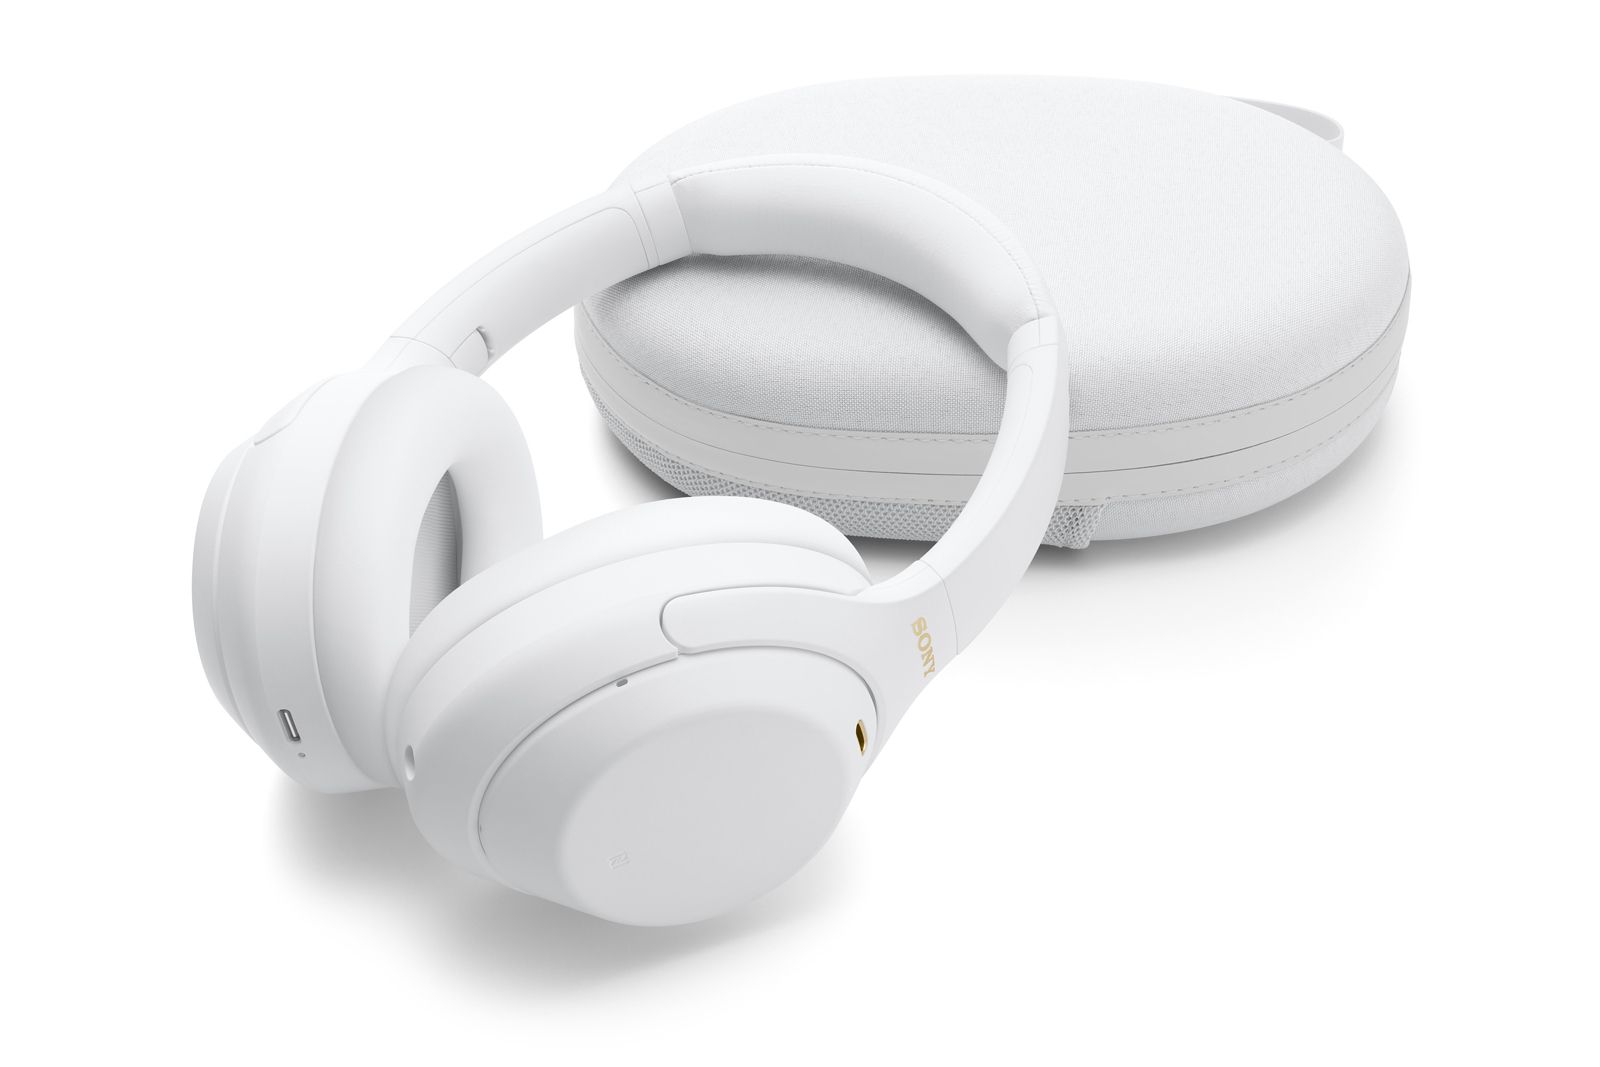 Sony debuts limited edition 'Silent White' version of its excellent WH-1000XM4 headphones photo 2